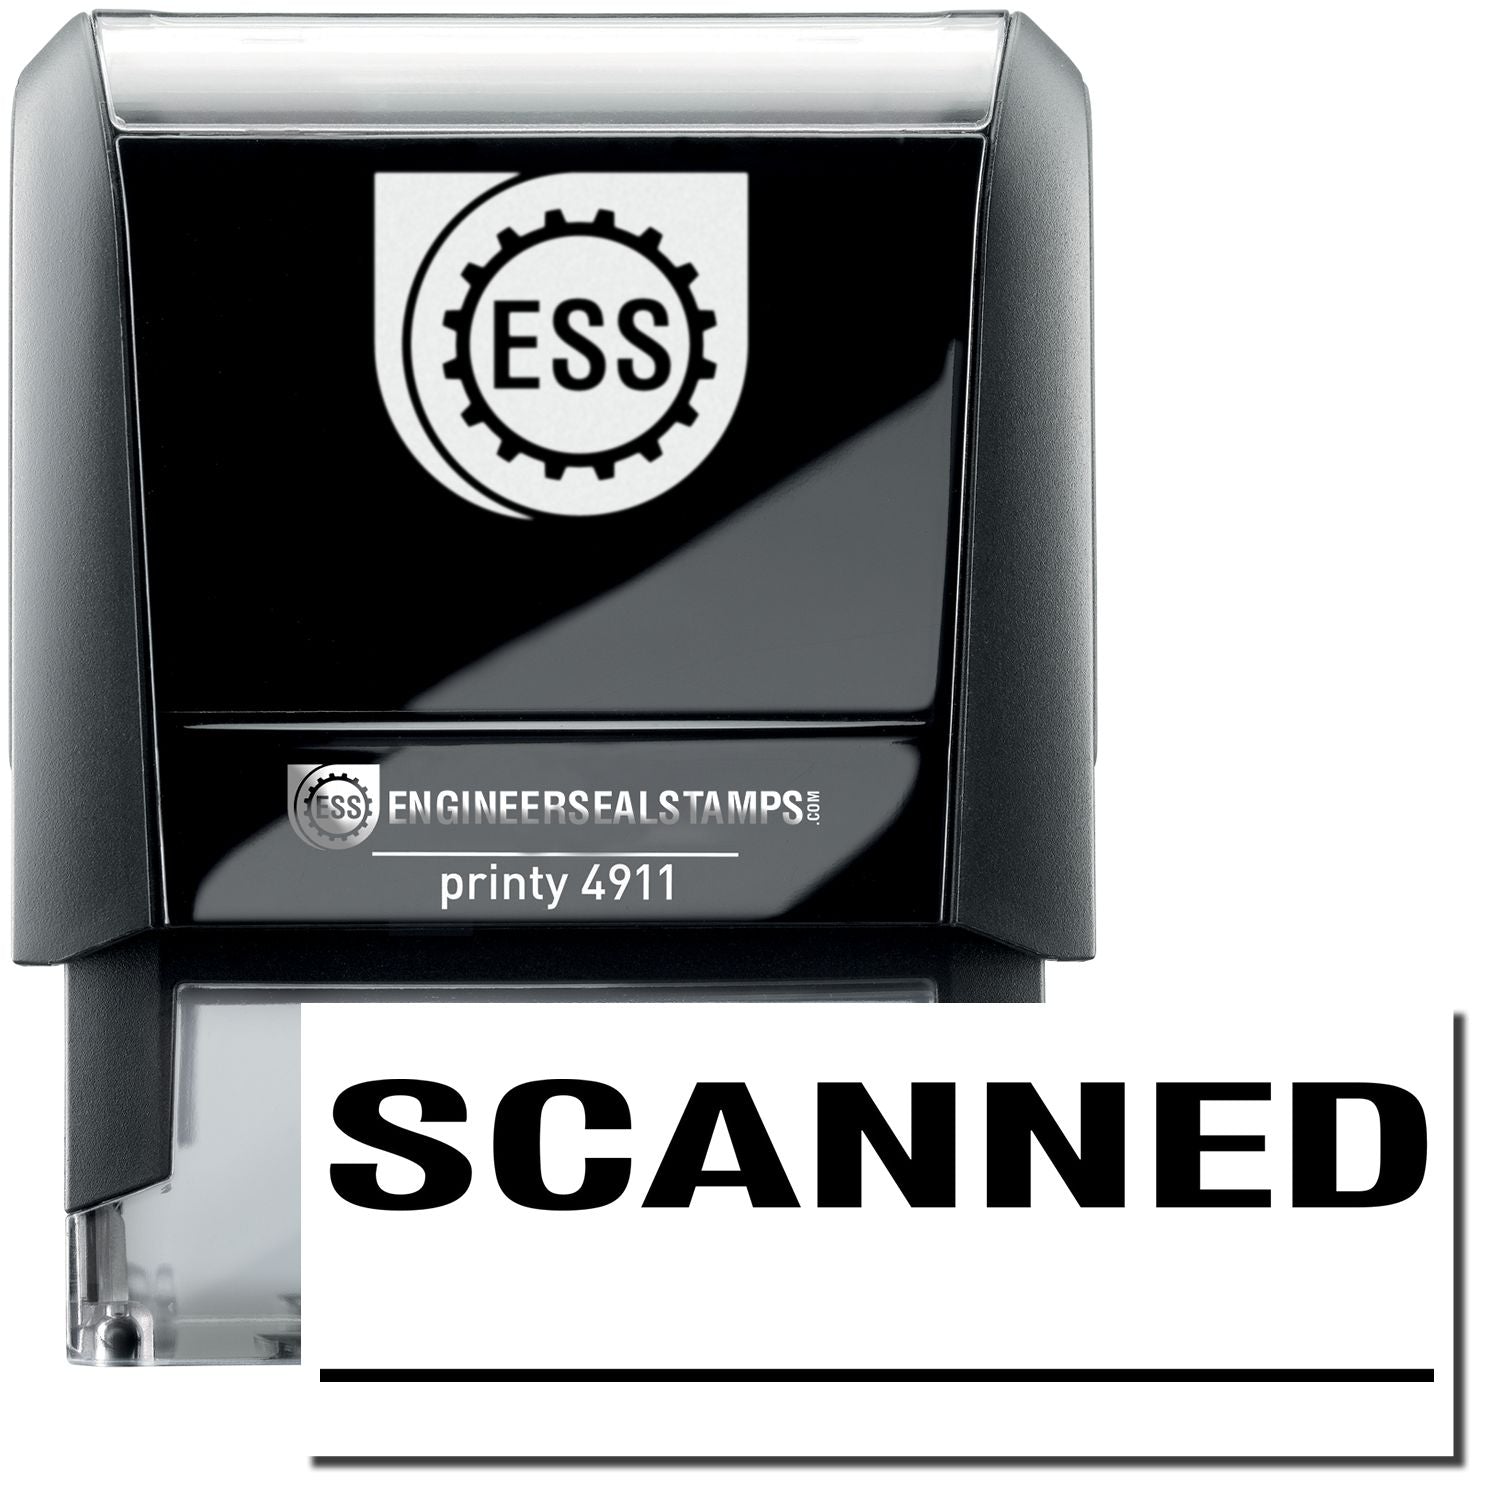 A self-inking stamp with a stamped image showing how the text "SCANNED" with a line under it is displayed after stamping.